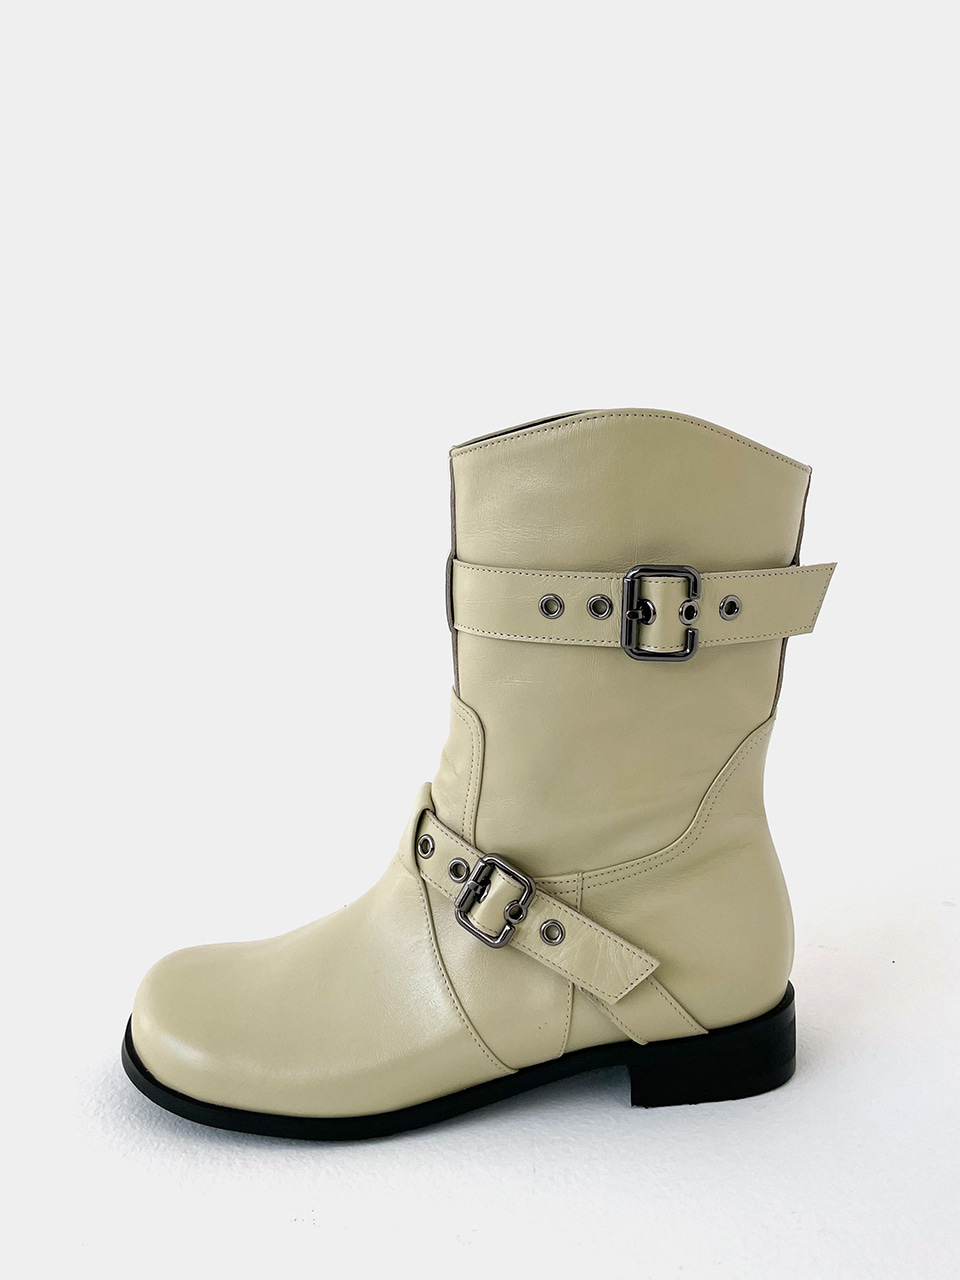 [Out of stock] [Exclusive] Mrc092 Nickel Middle Boots (Yellowish-Cream)